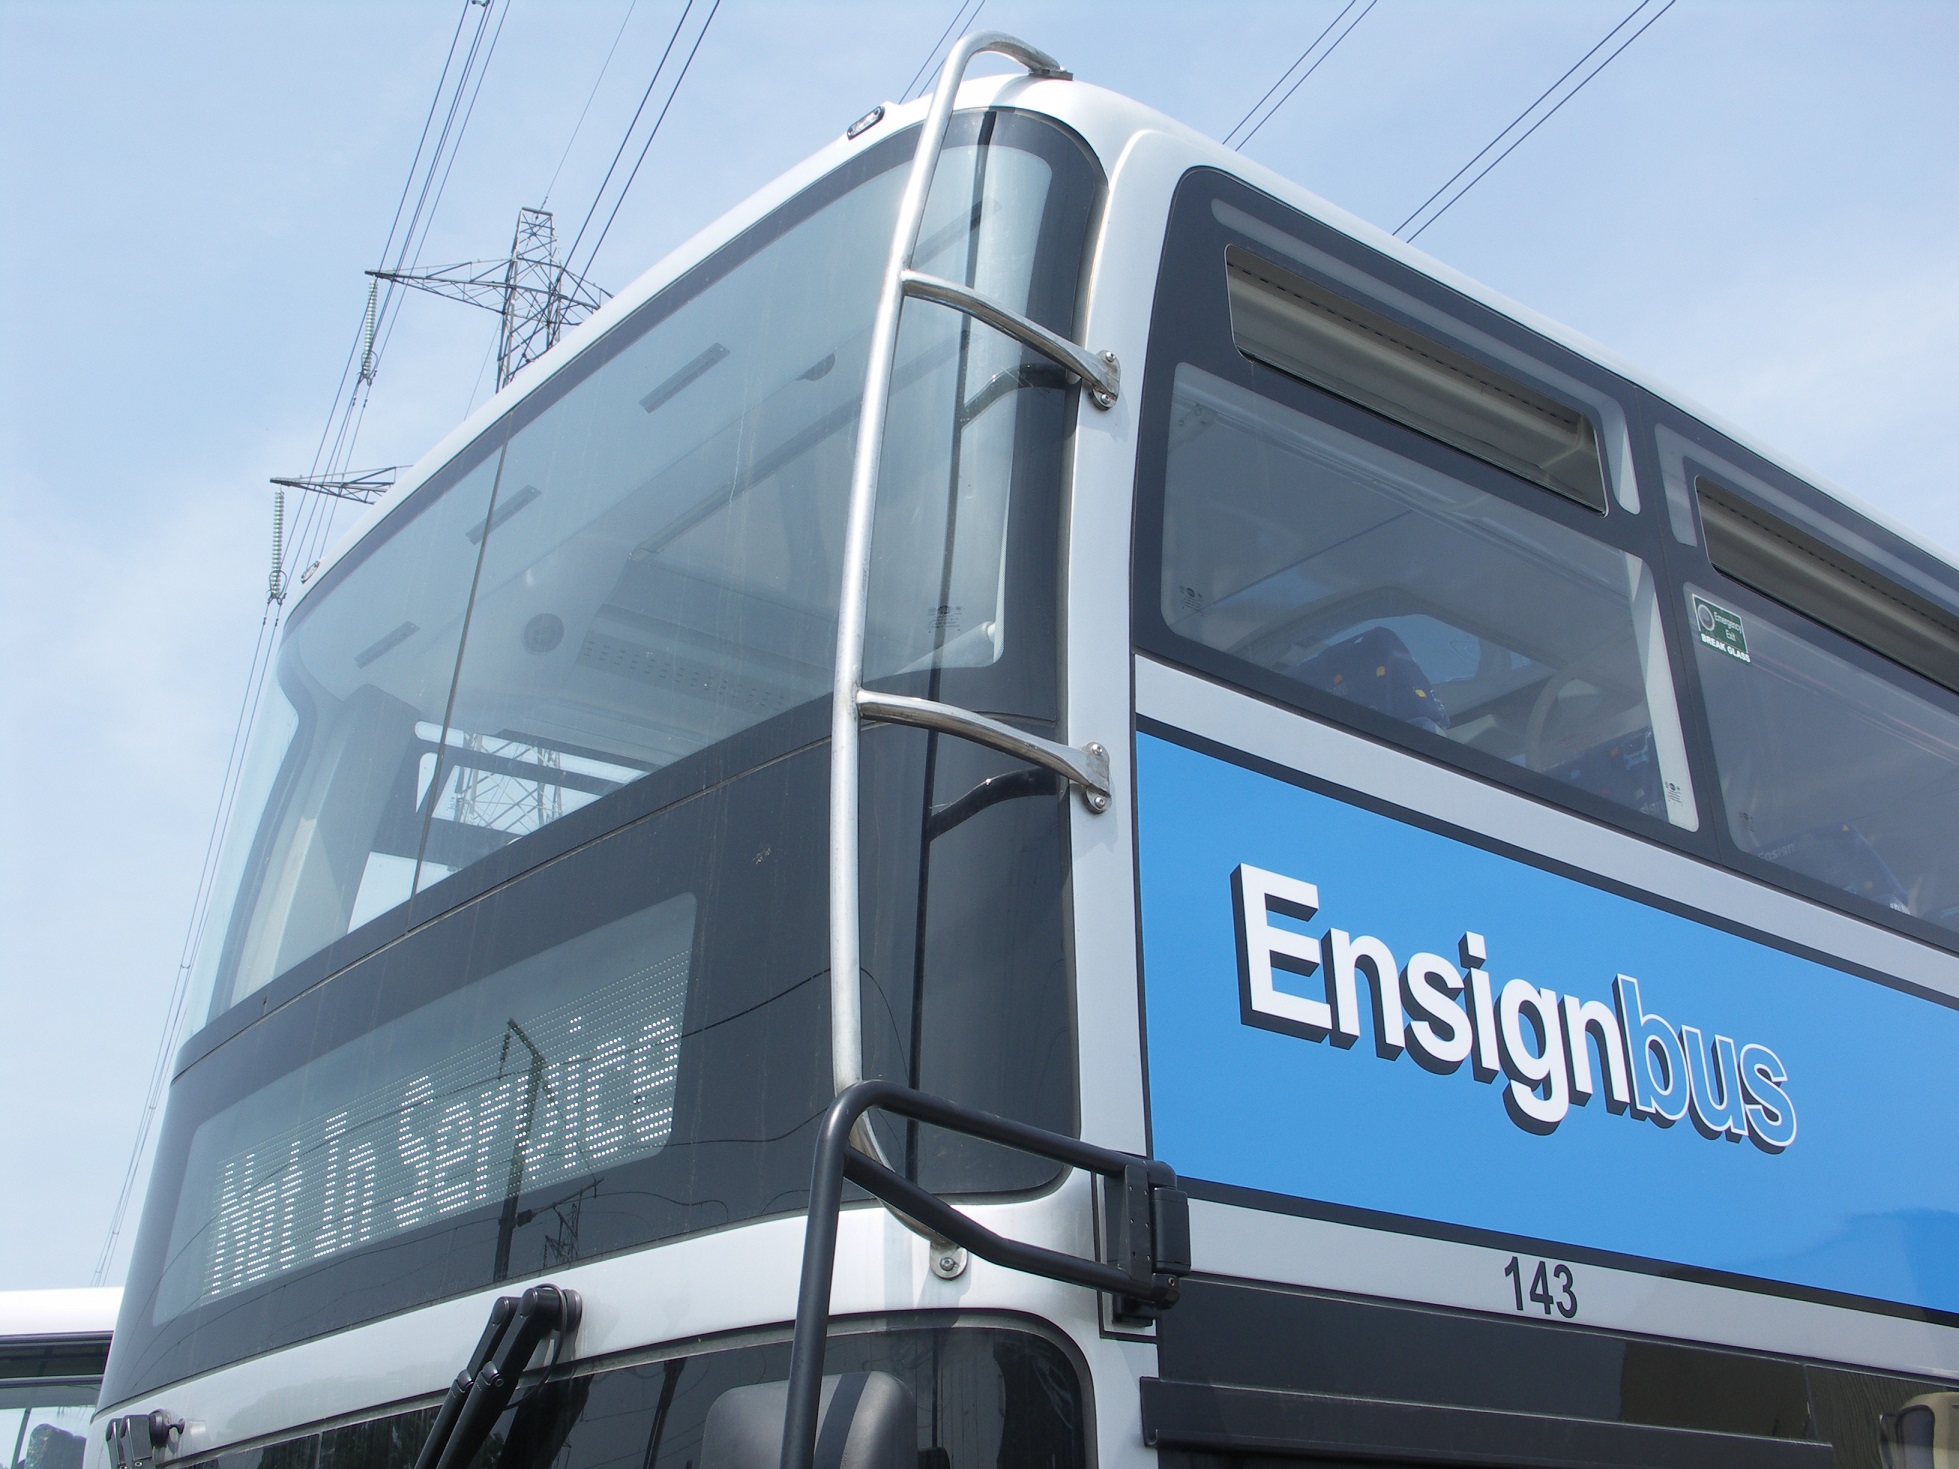 FirstGroup agrees to purchase Ensignbus